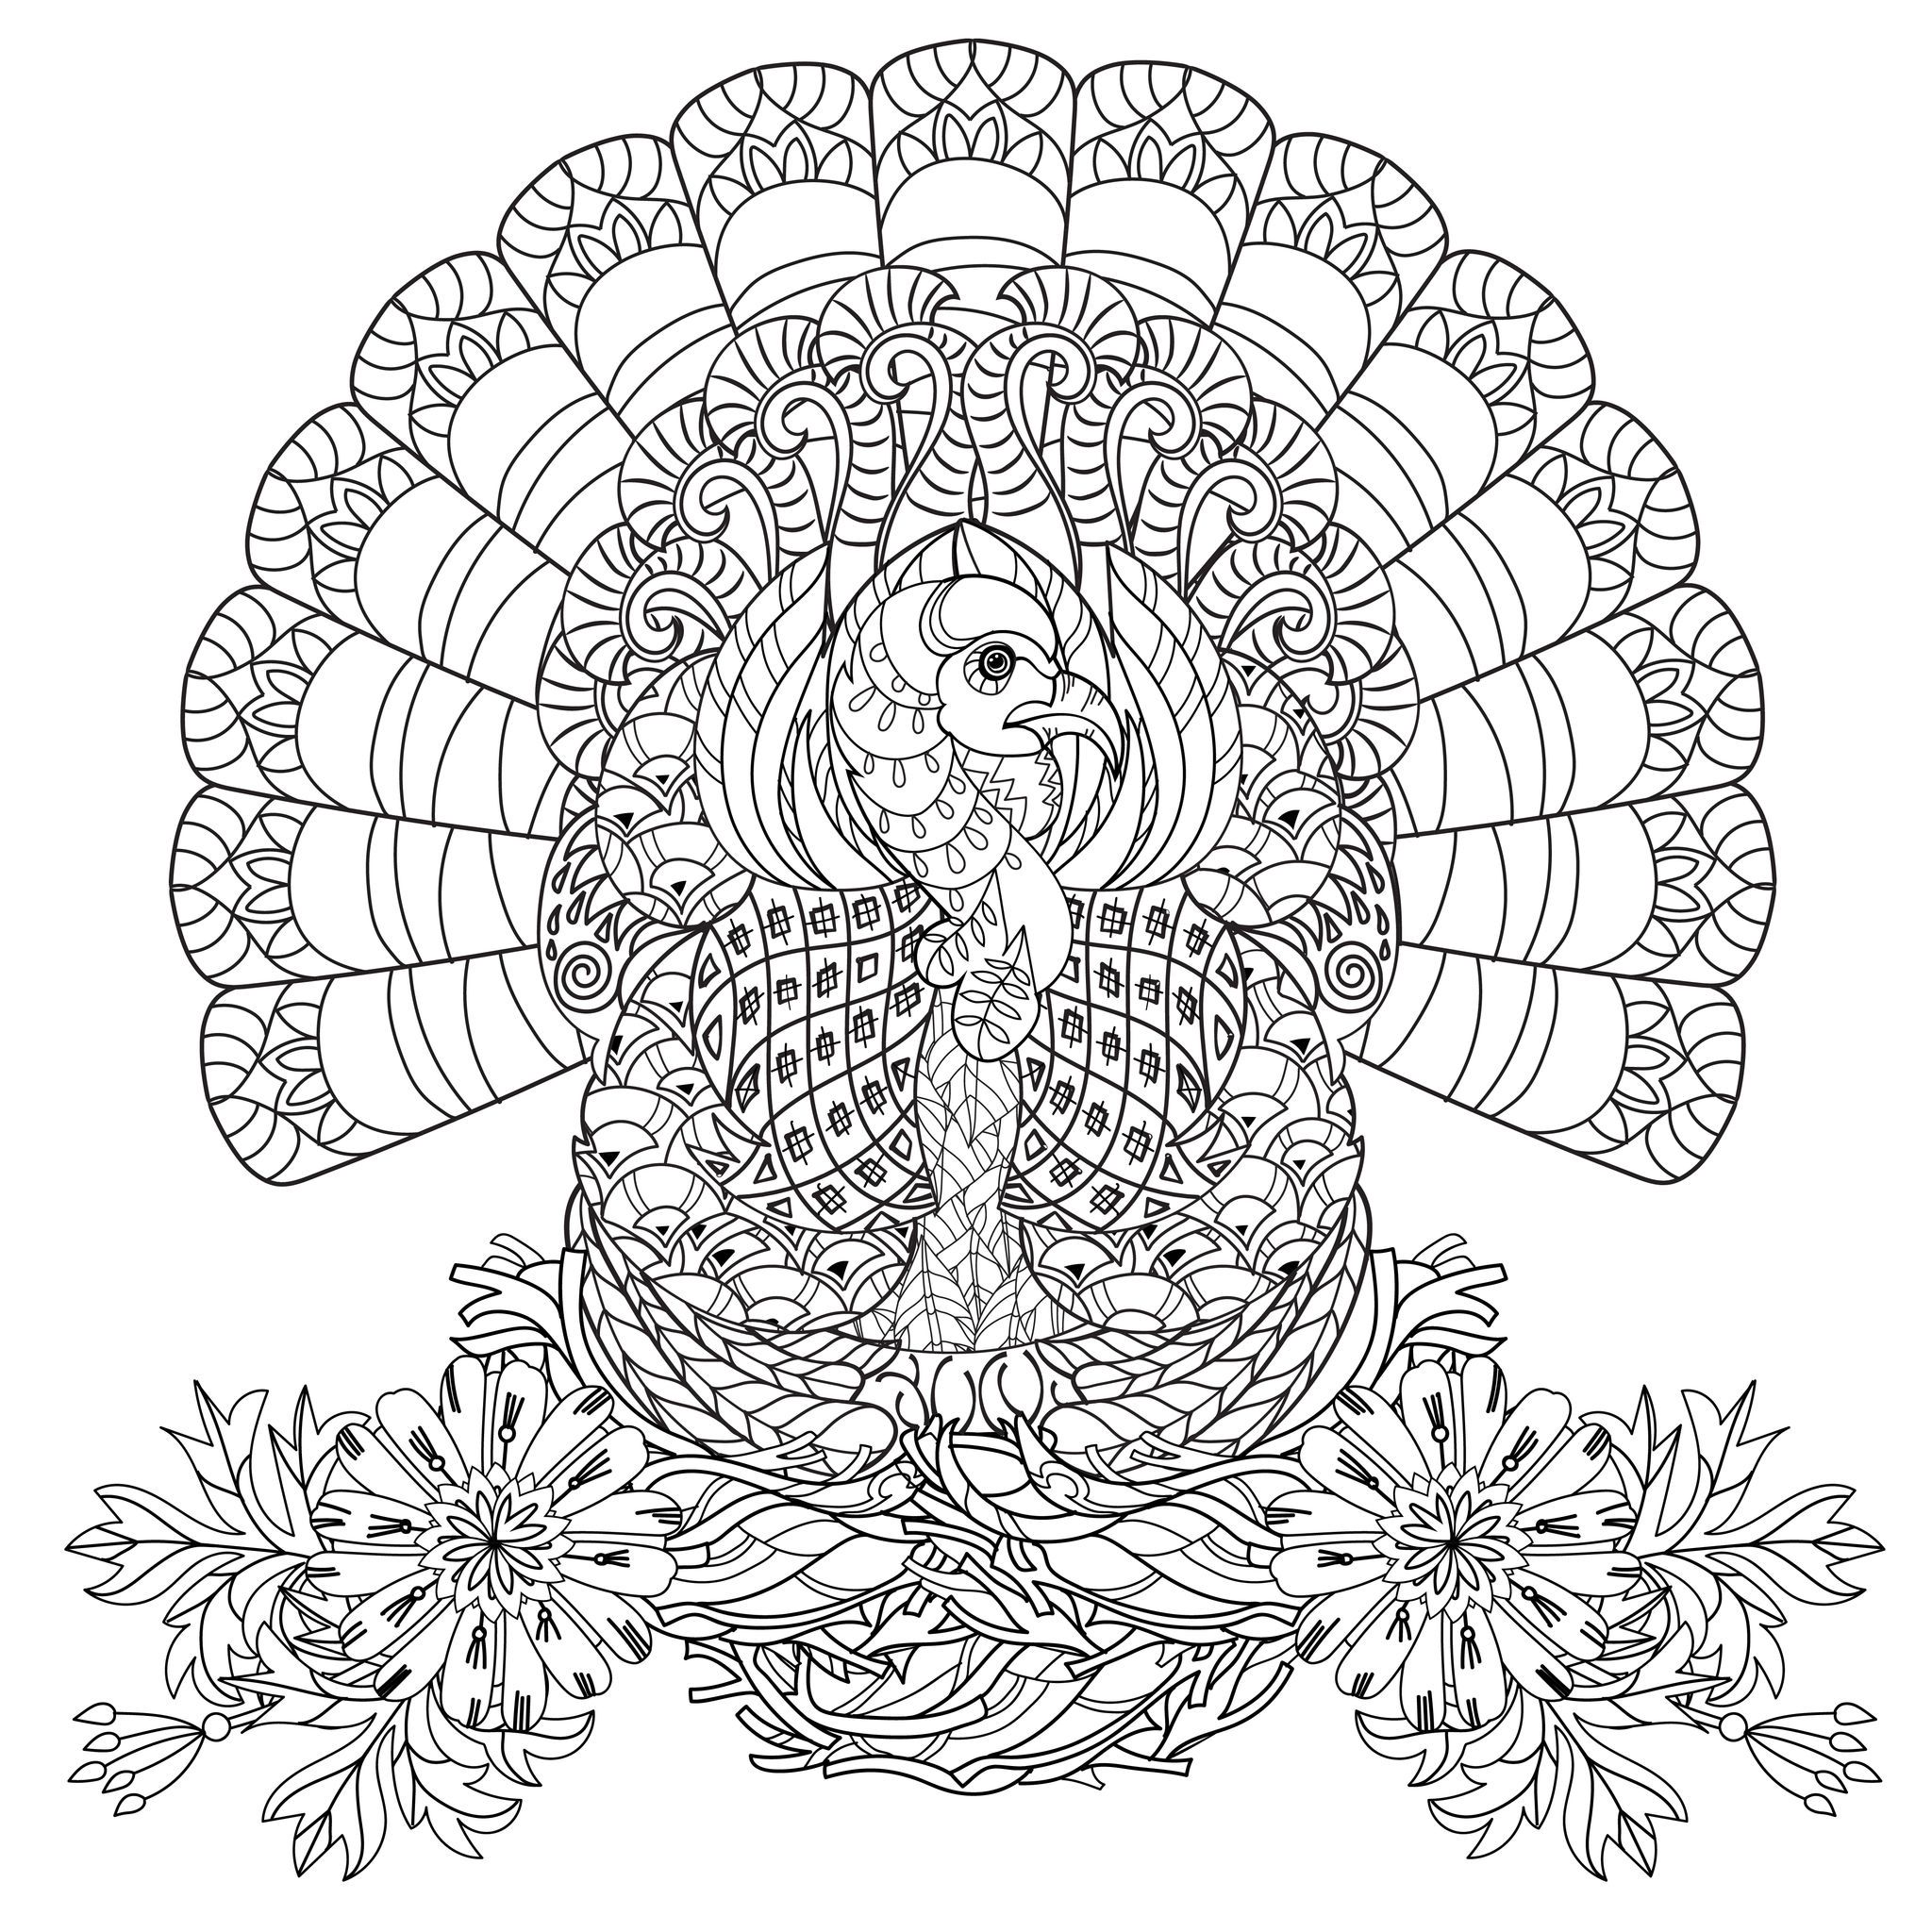 Thanksgiving - Coloring Pages for adults